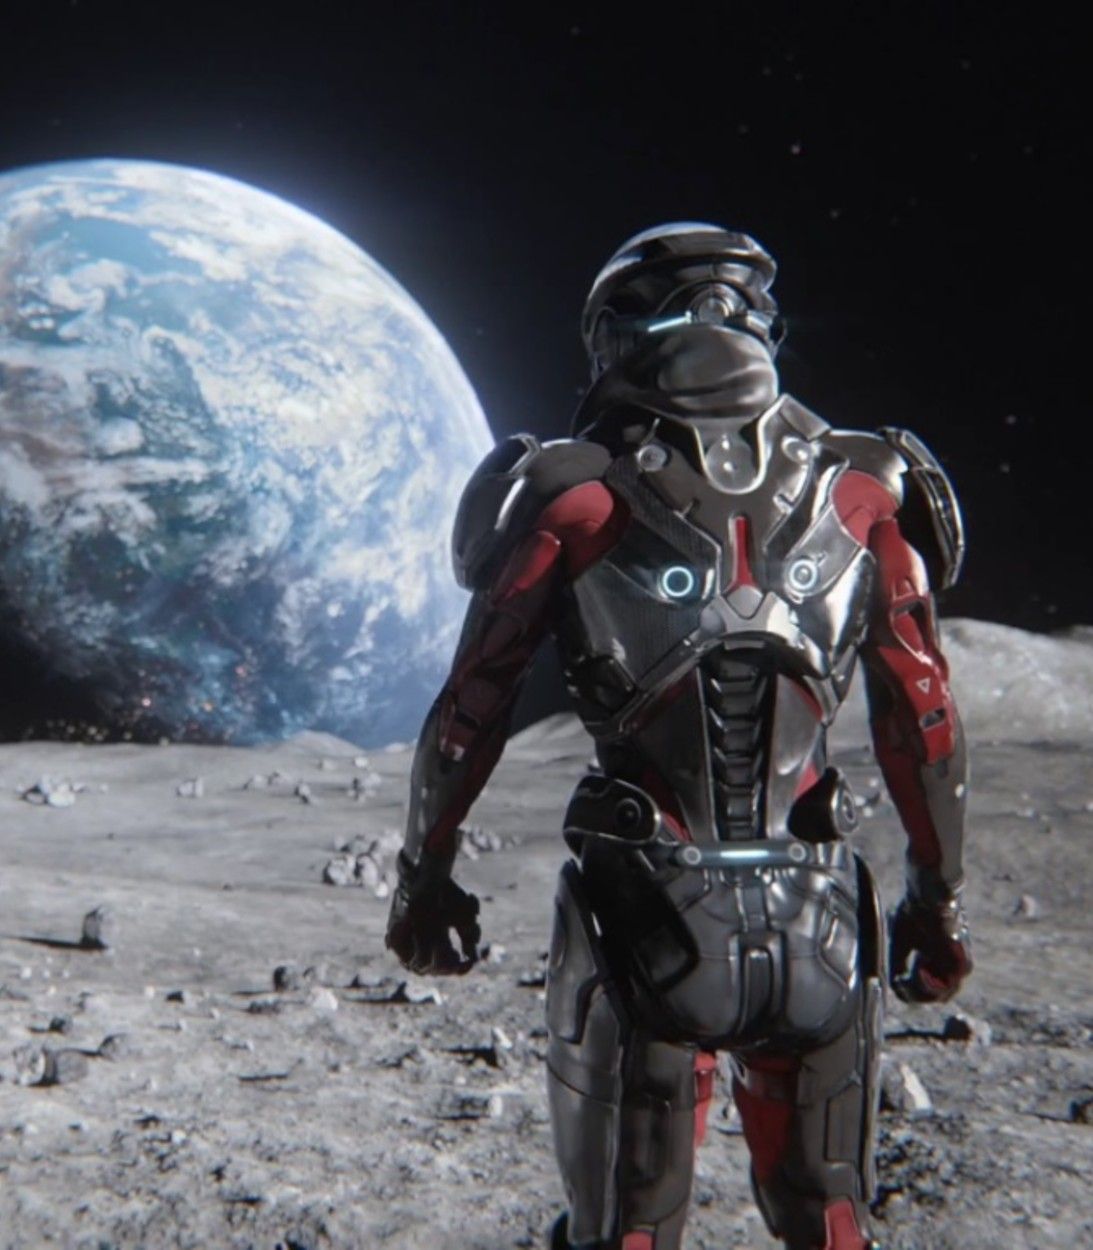 Mass Effect: Andromeda takes players to other planets through the Andromeda Initiative